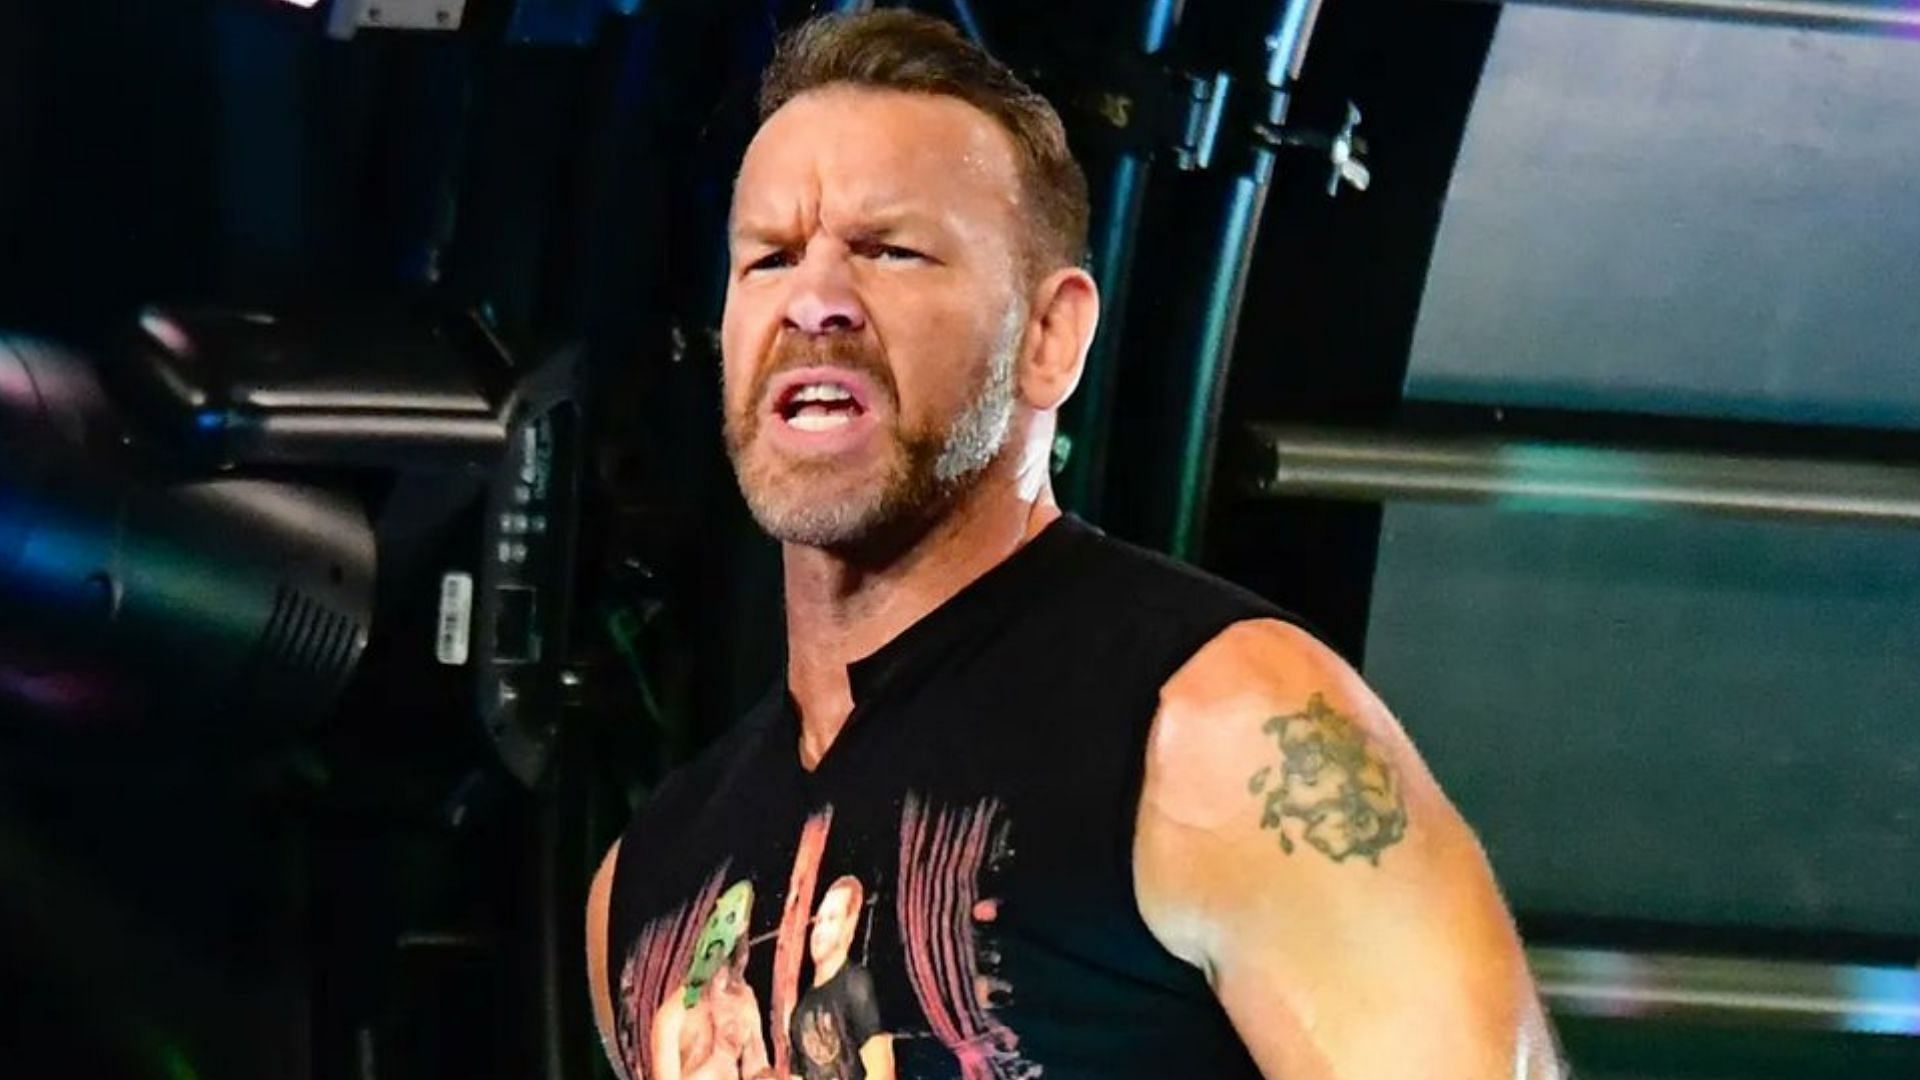 Christian Cage made his return to AEW on Dynamite this past week